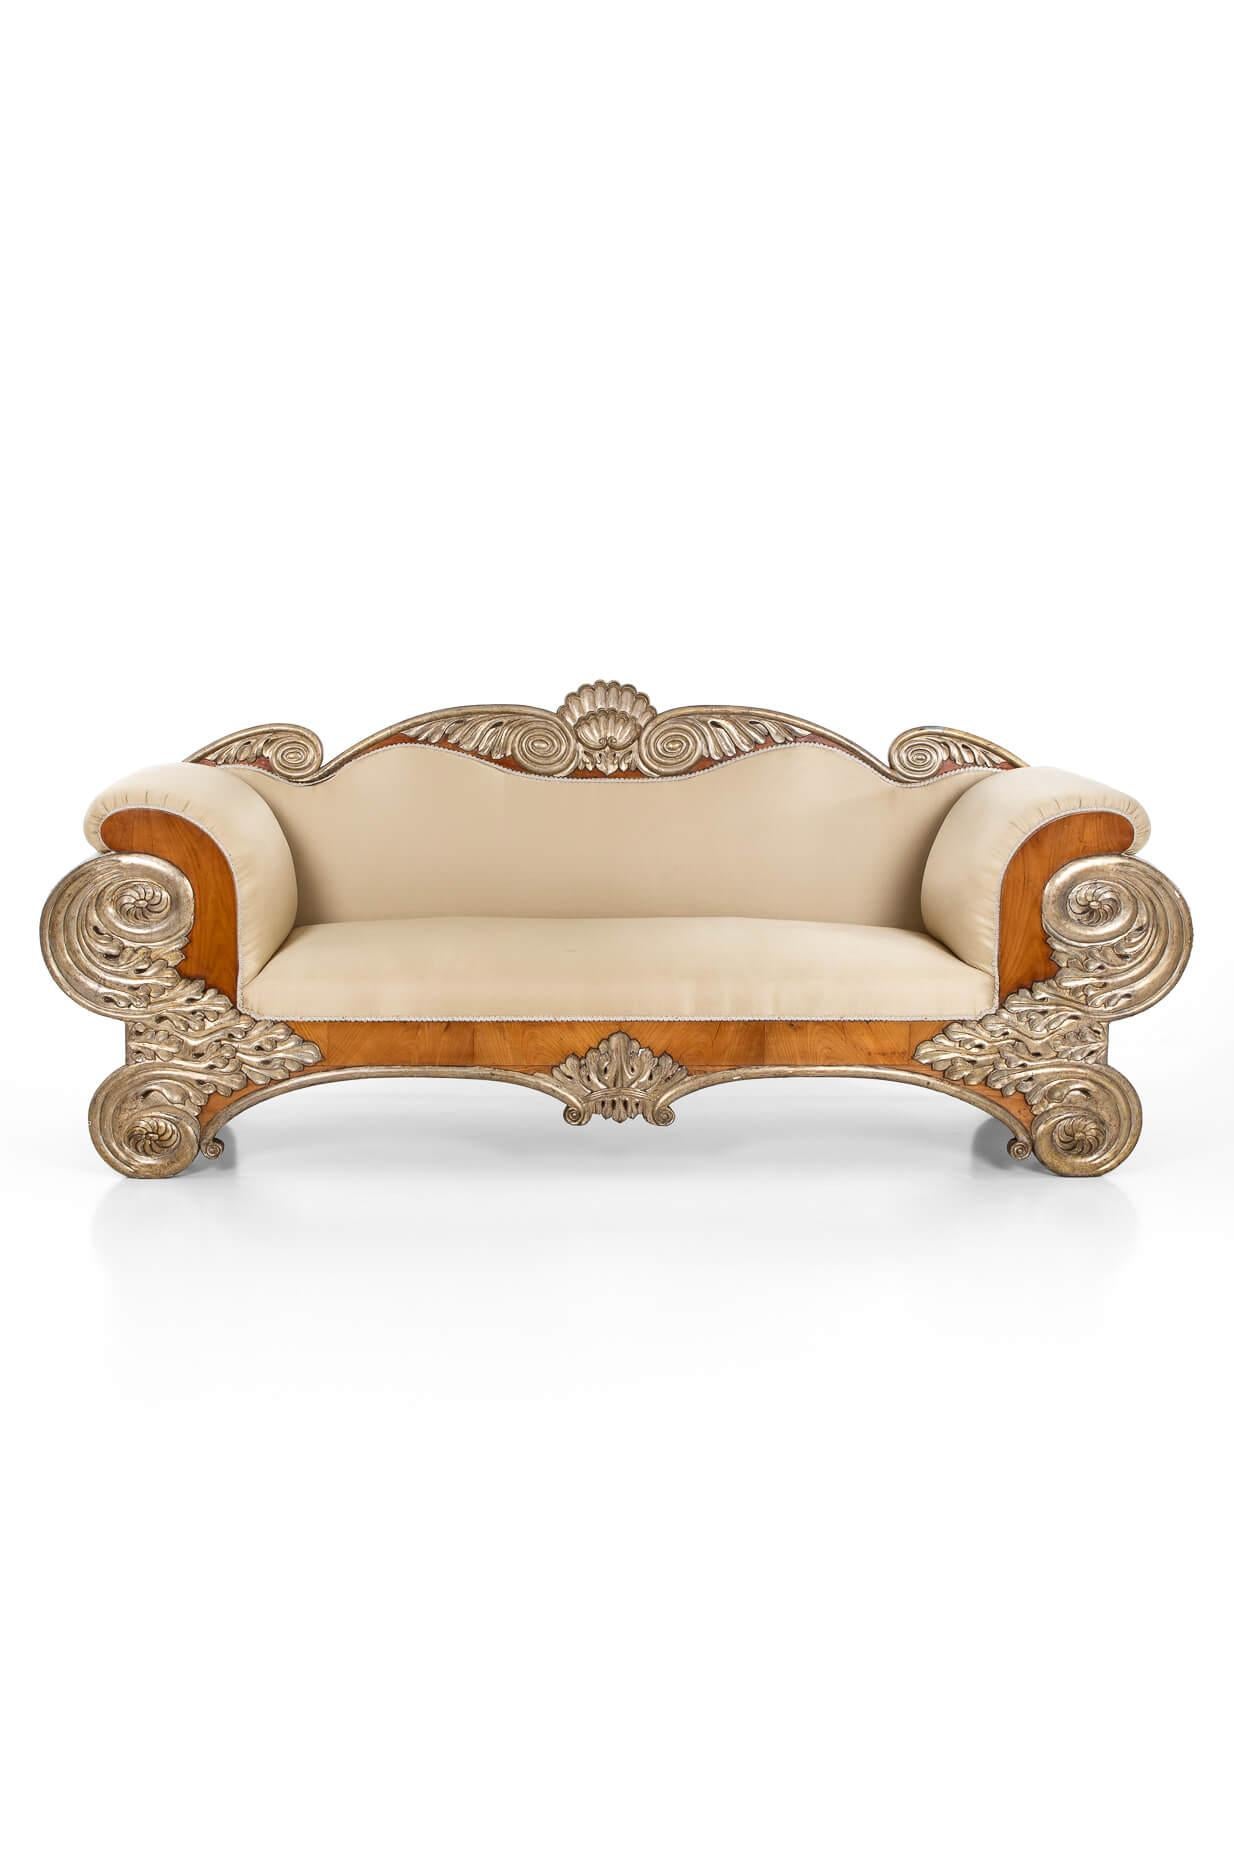 A commanding and elegant early 19th century Spanish salon sofa.

Carved in birch and giltwood, the generously padded back is crested with striking volutes, leafage and a central clam shell.

Each end of the scrolling arms is decorated with a gilded